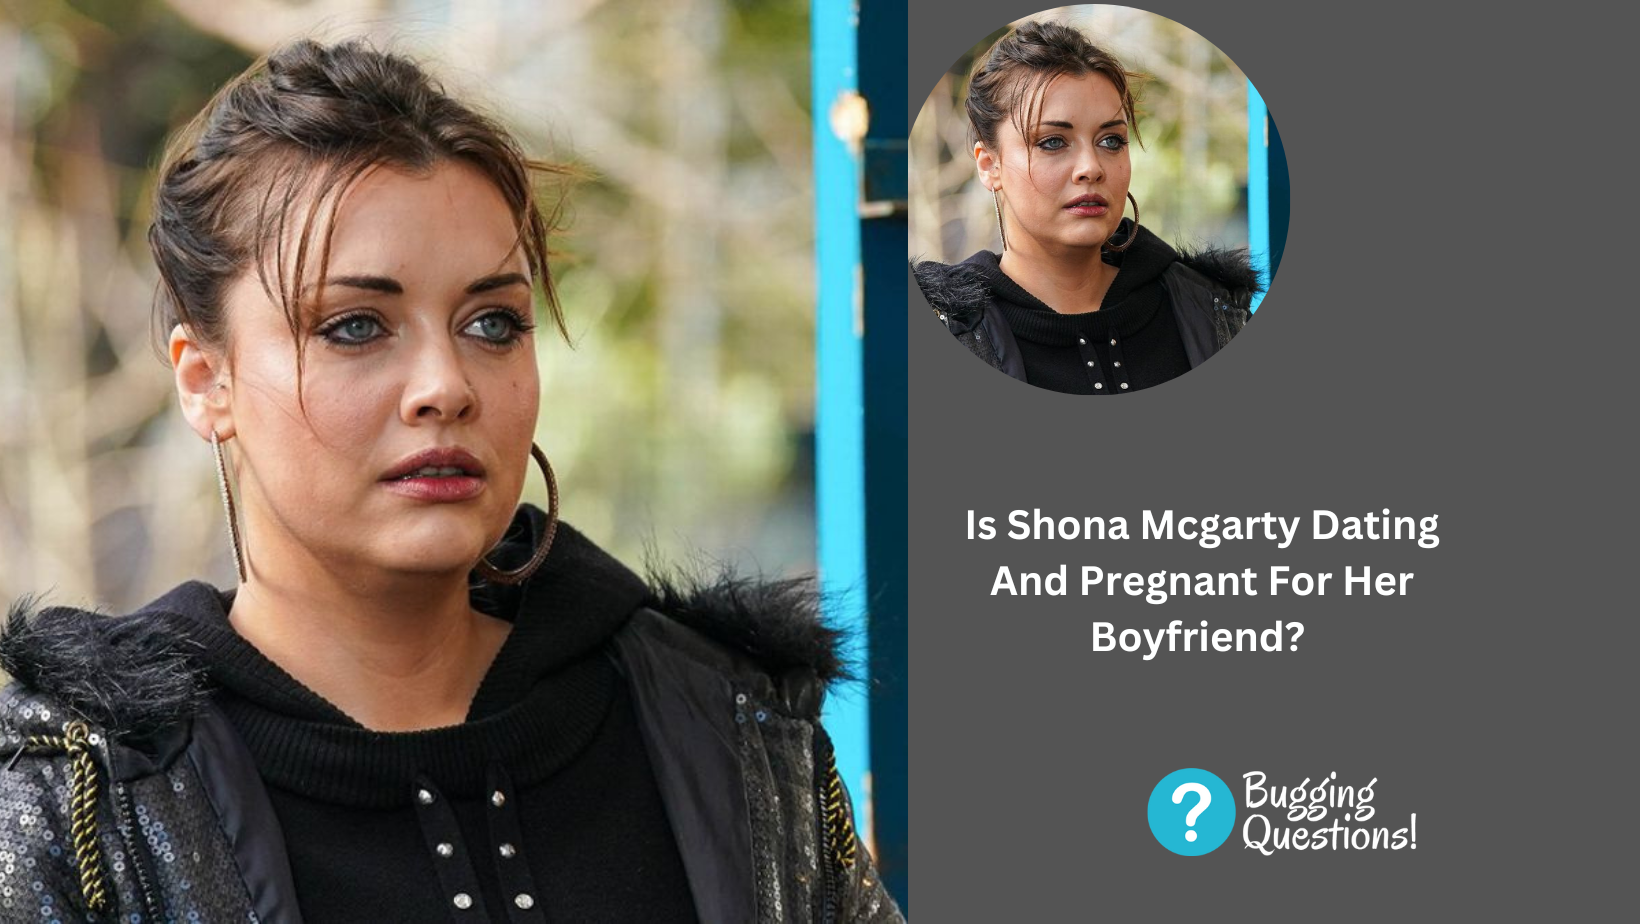 Is Shona Mcgarty Dating And Pregnant For Her Boyfriend?